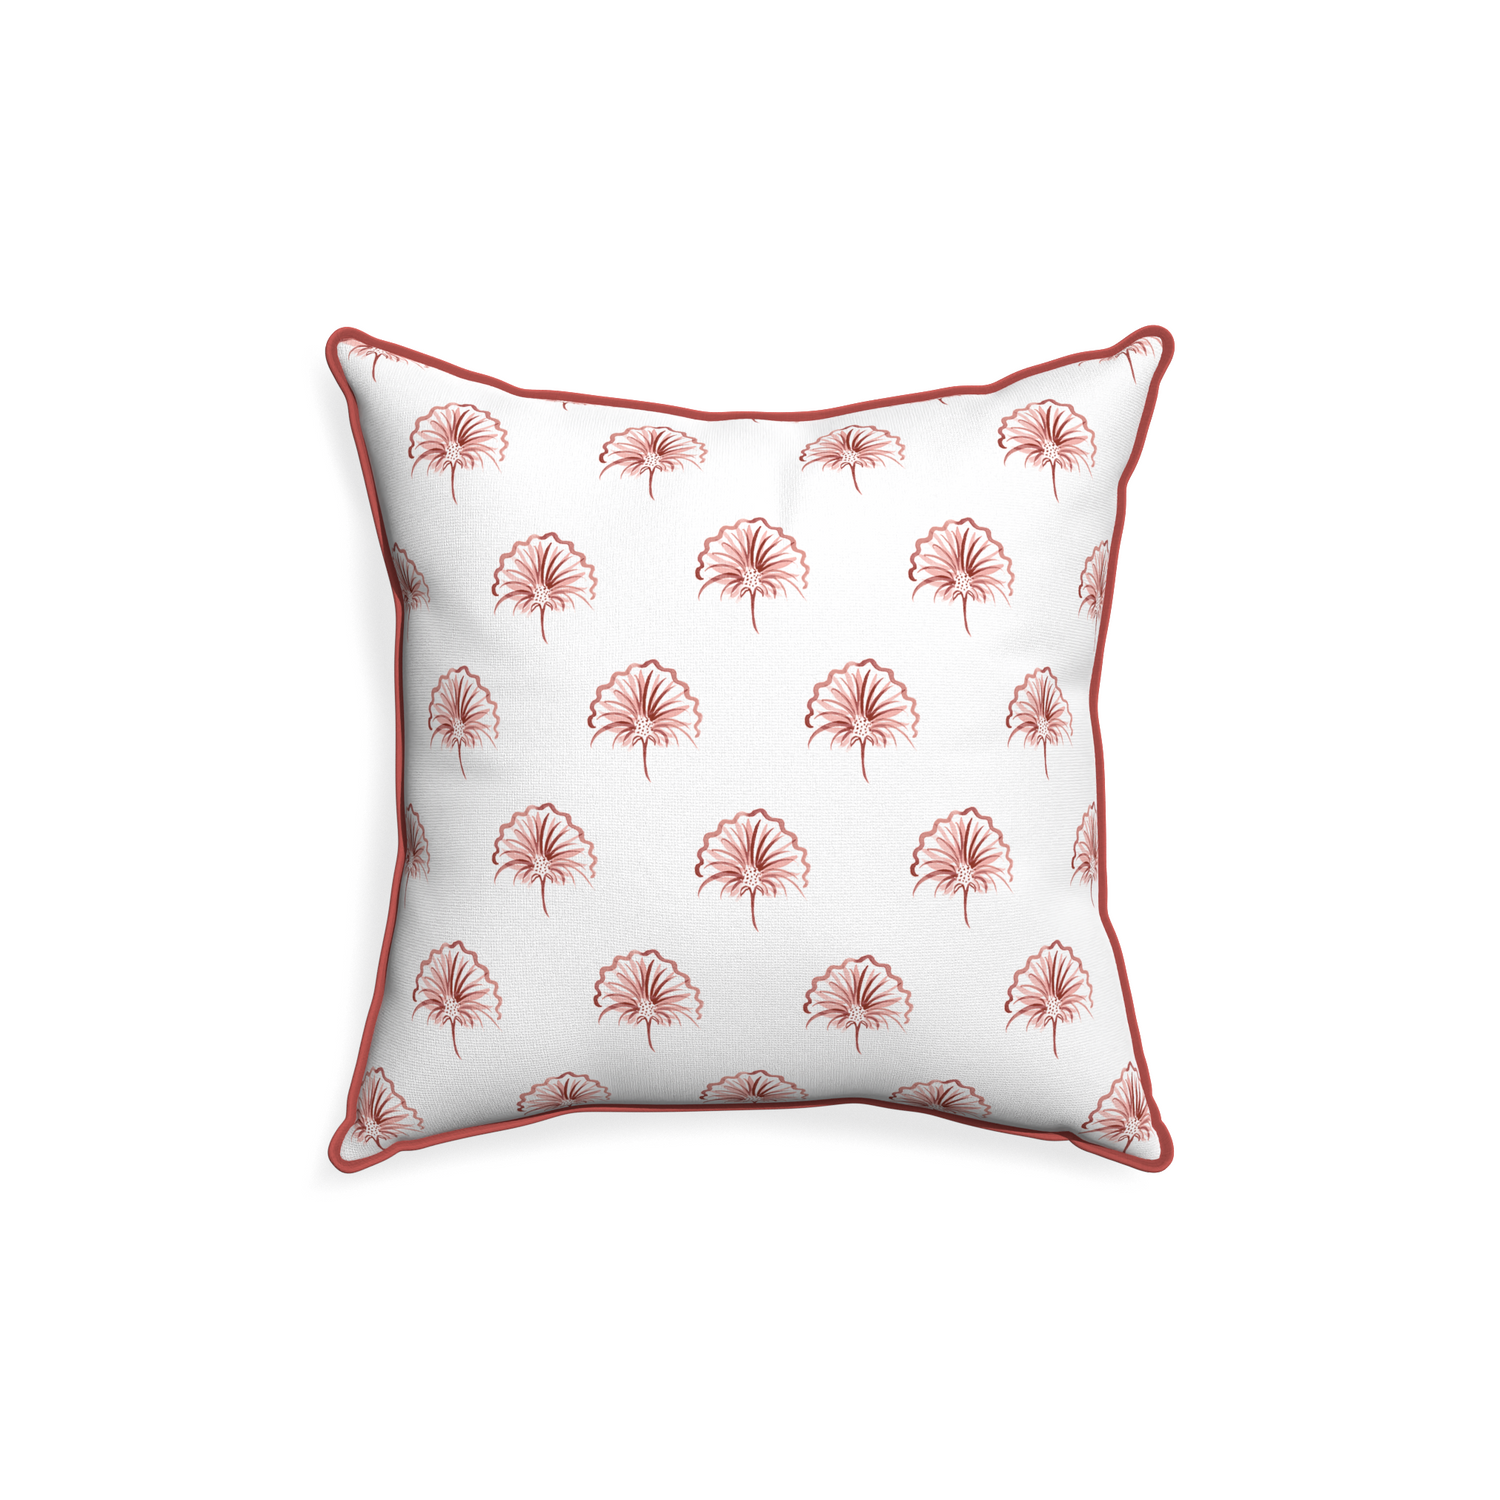 18-square penelope rose custom floral pinkpillow with c piping on white background